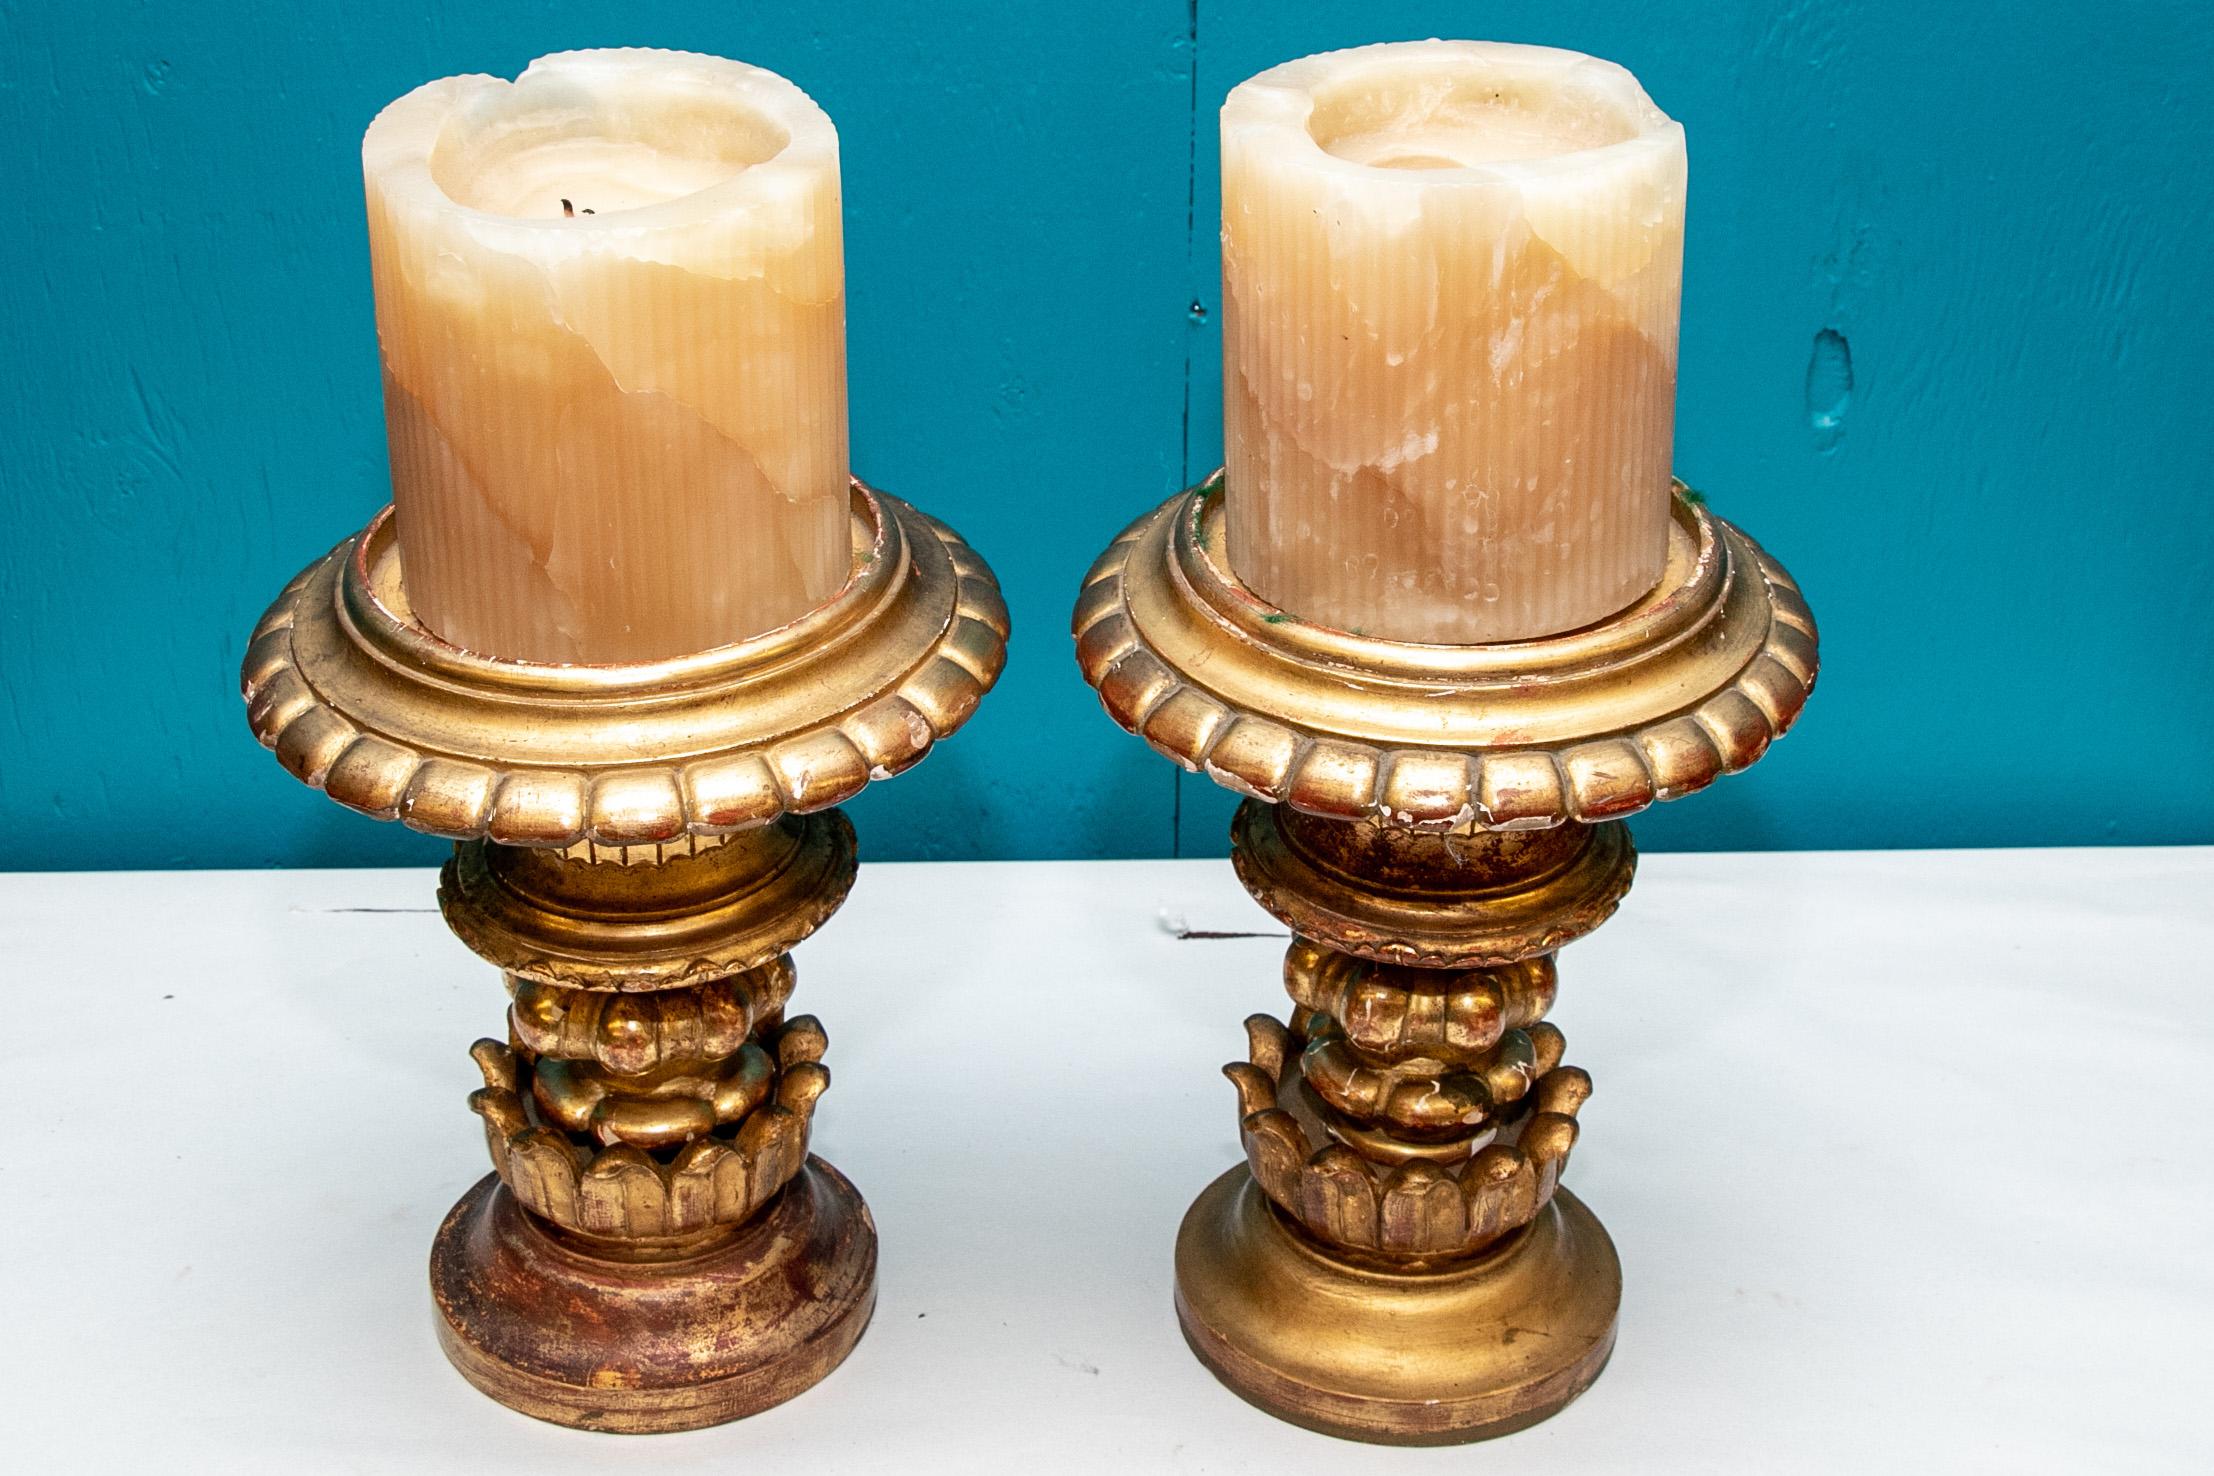 Pair of antique carved and gilt candle stands, tiered neoclassical forms with wide round tops carved with bosses and leaves. Carved, gessoed and gilt. 

Condition: Expected signs of use including some chips to gilt.